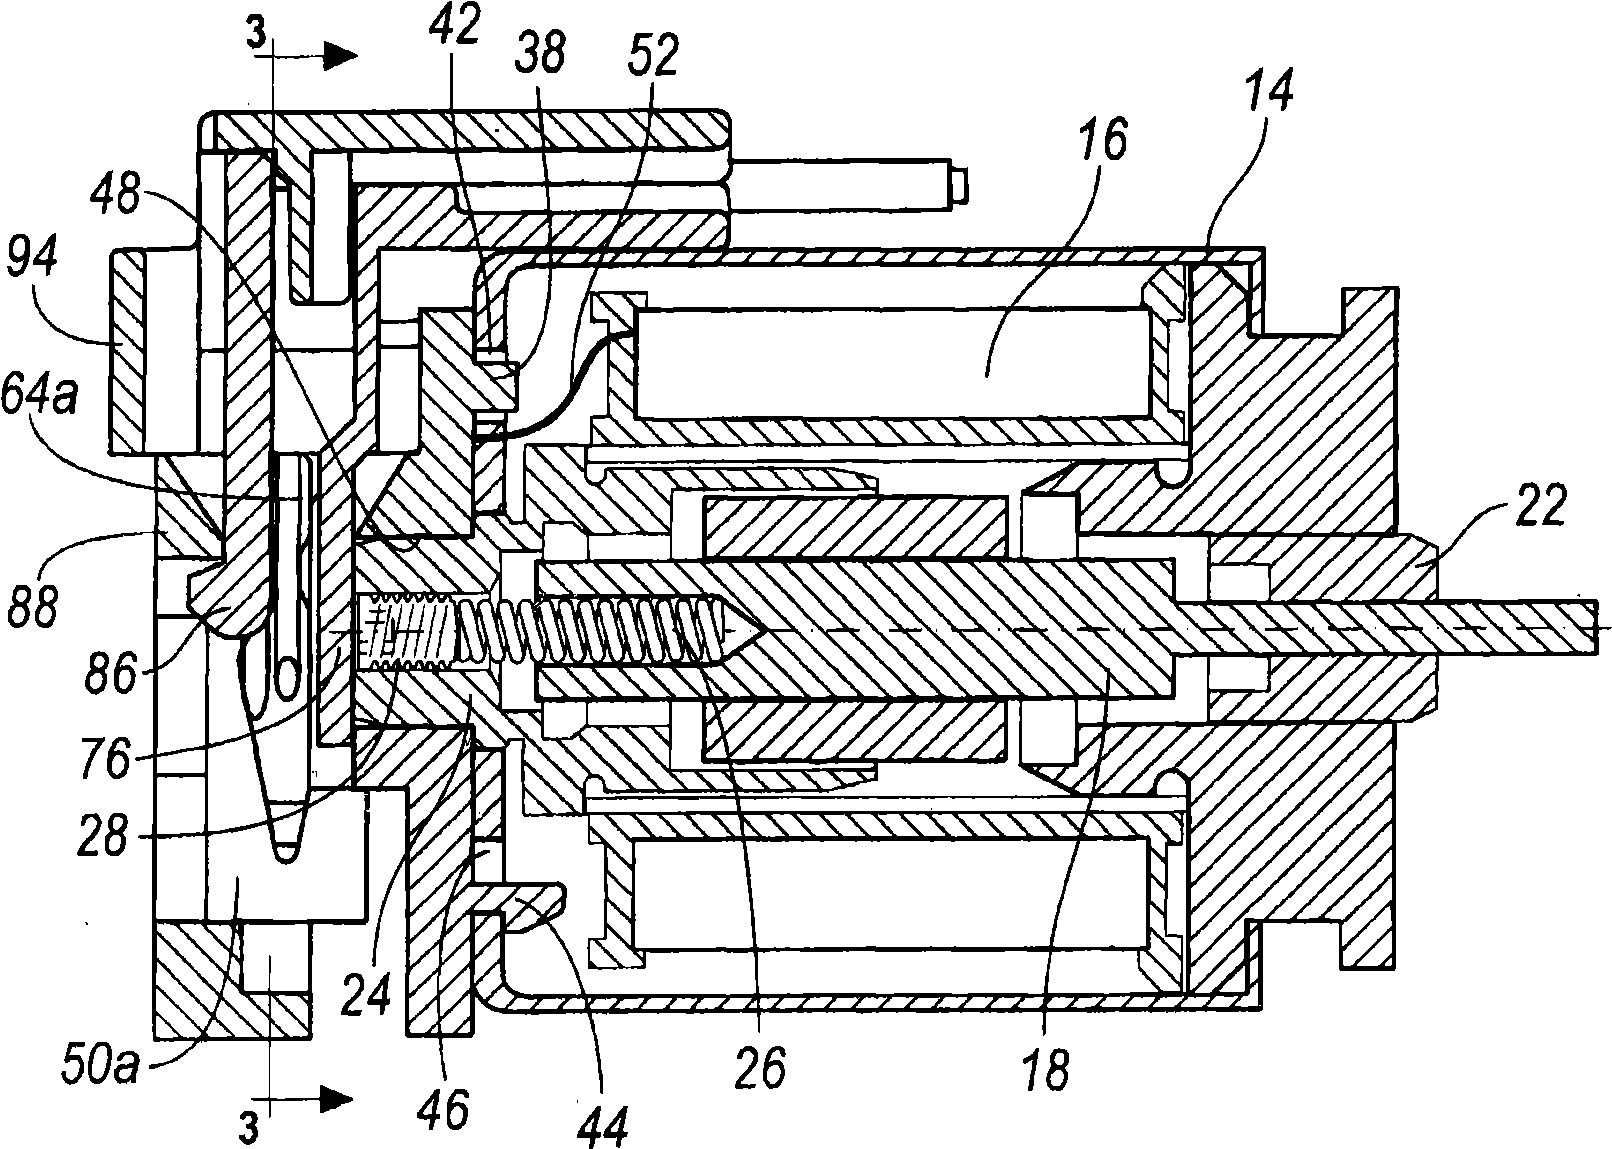 Solenoid and connector assembly